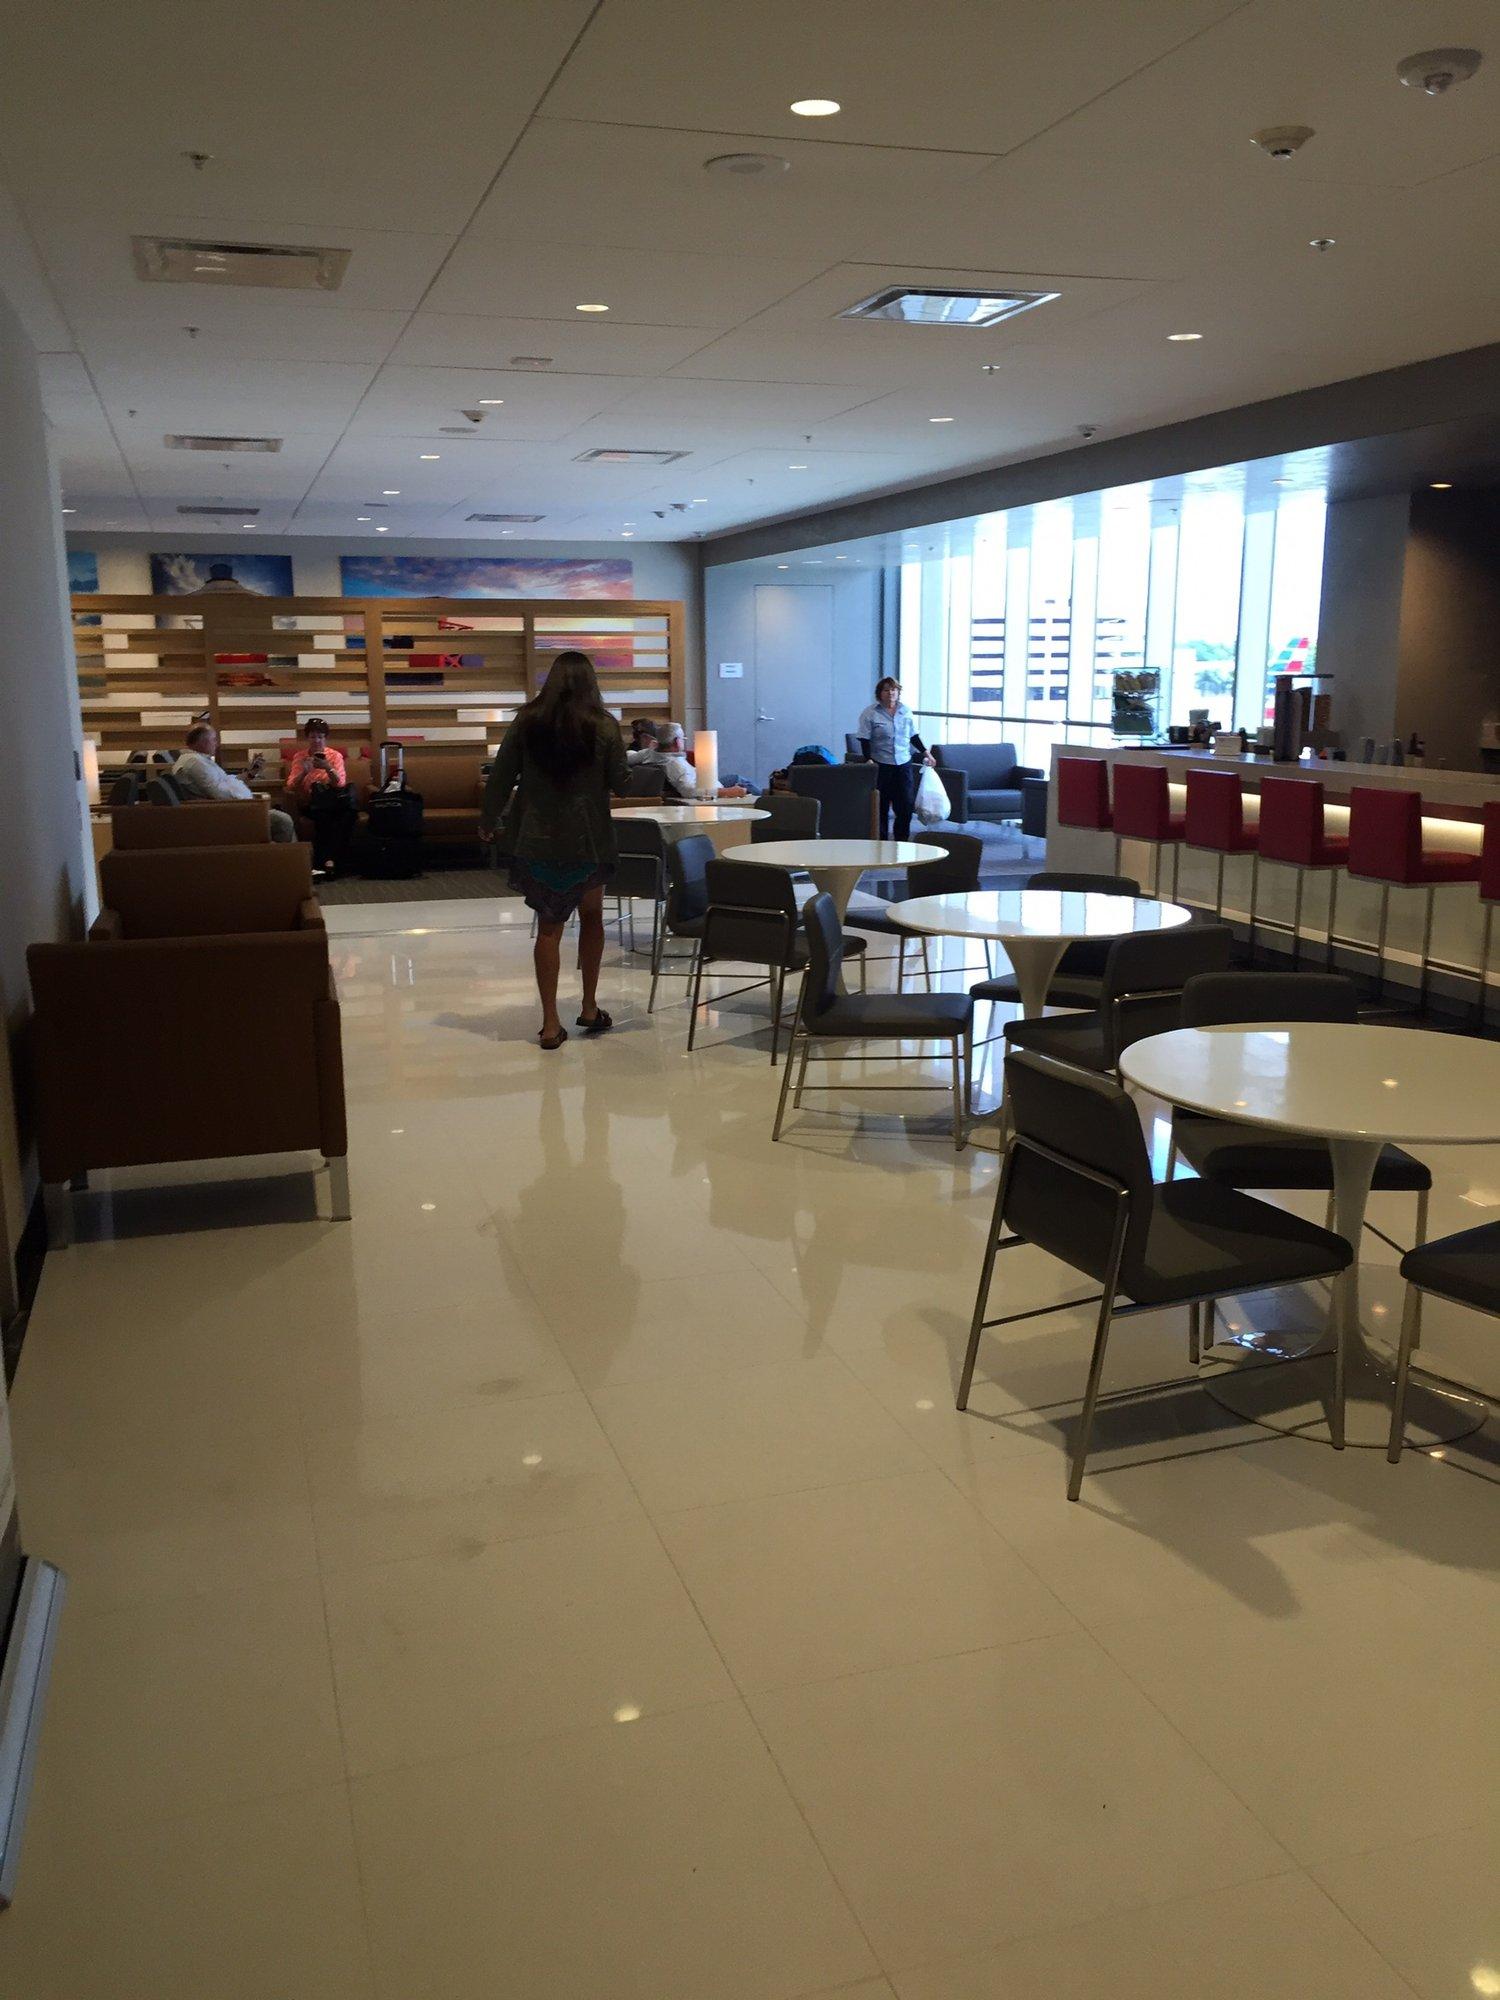 American Airlines Admirals Club (Gate D15) image 10 of 25